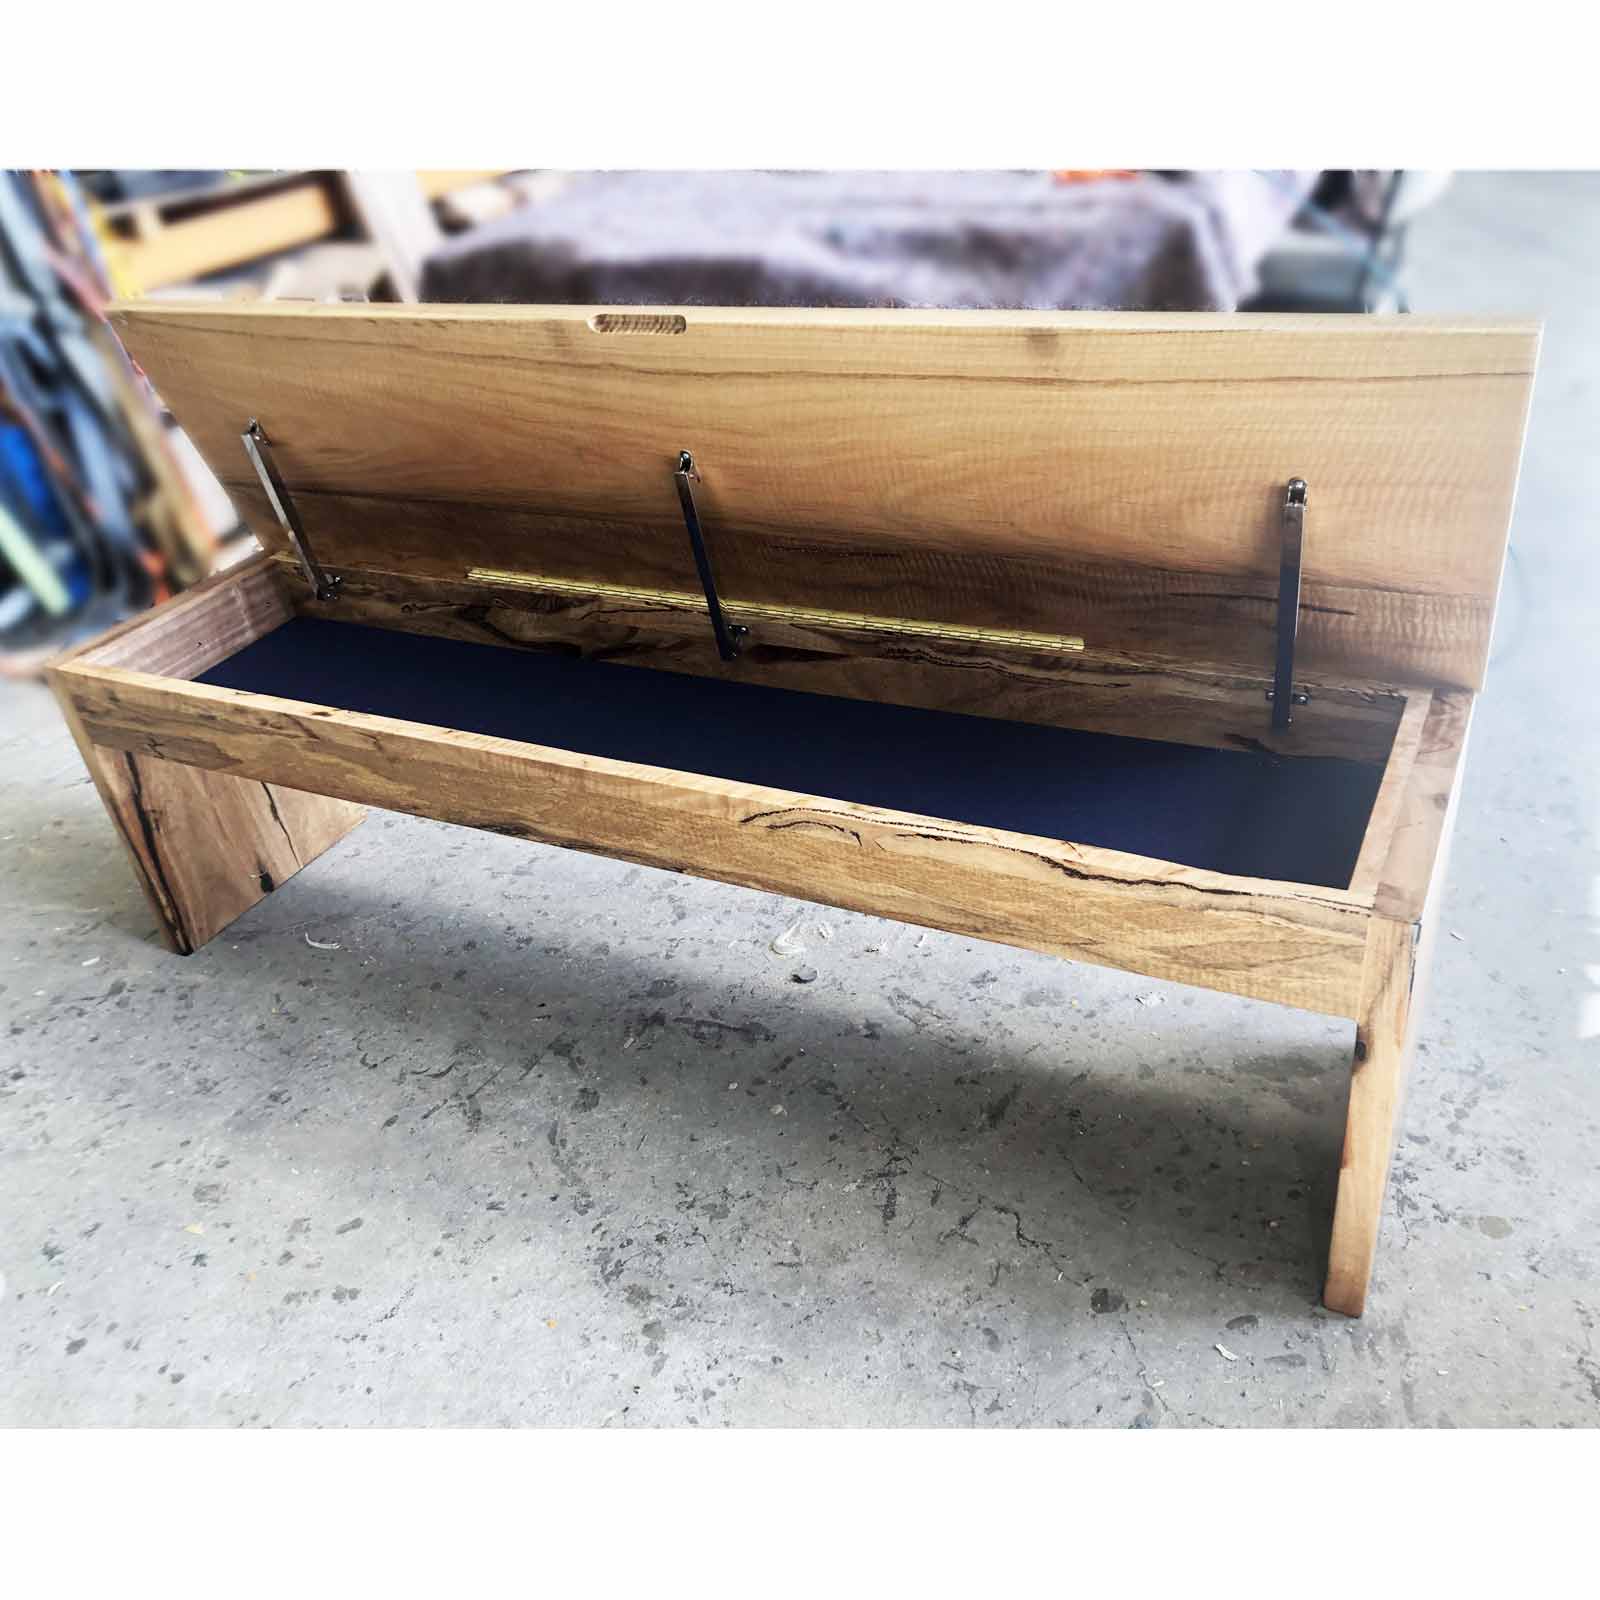 Bench Seat With Storage, Outdoor Bench Seat With Storage Australia